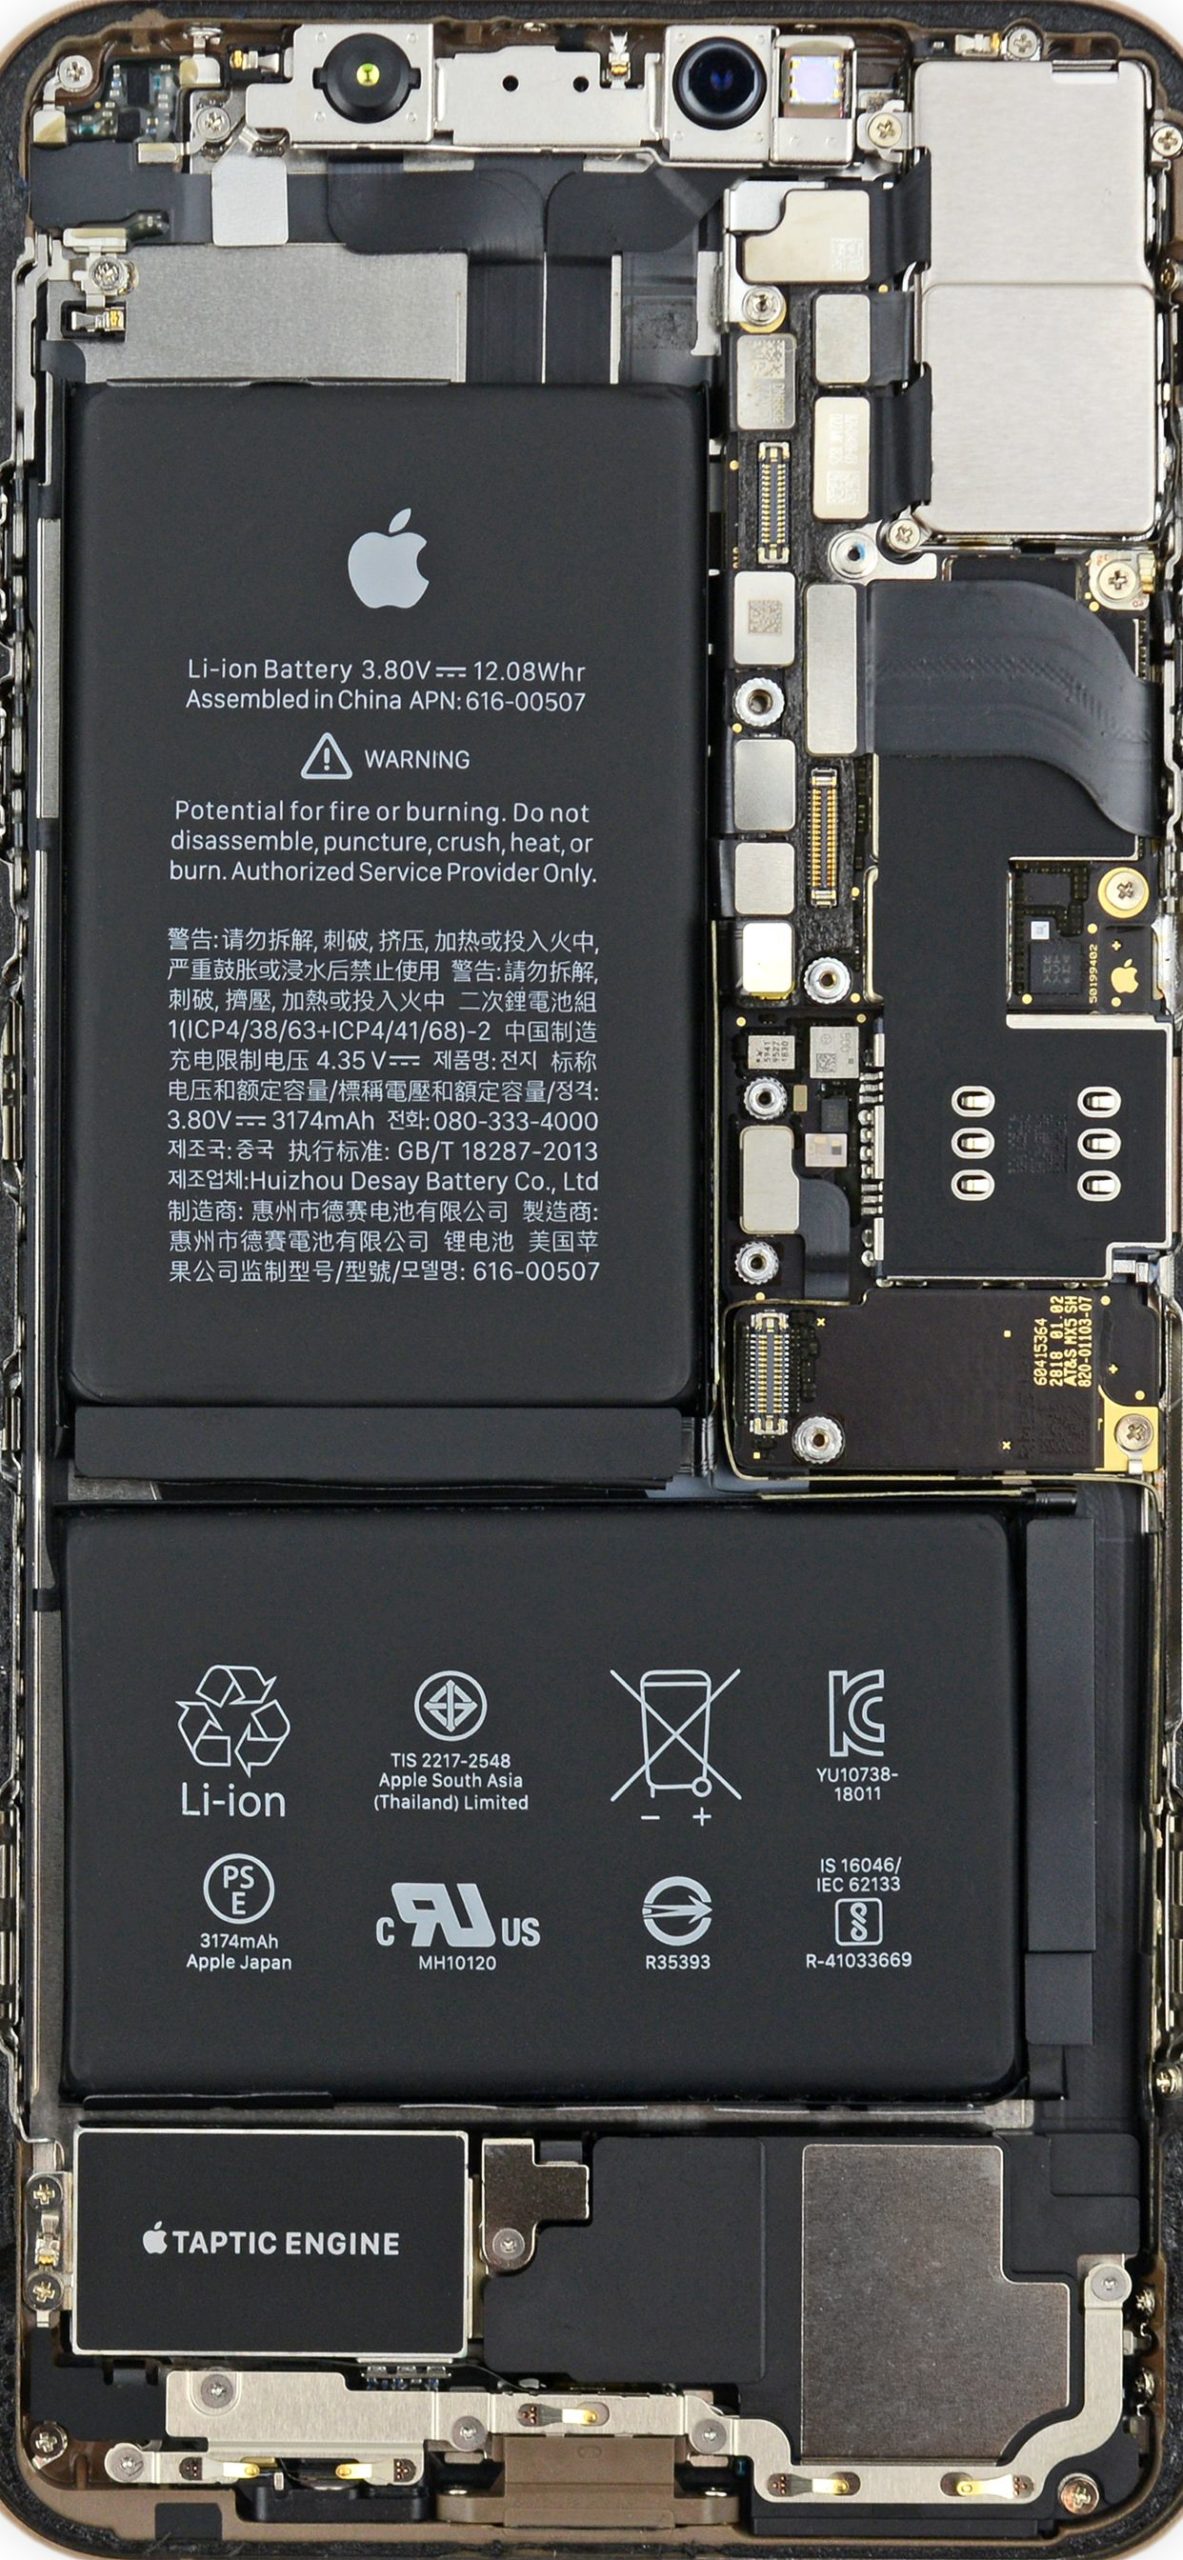 Double The Iphone Xs Teardowns = Double The Wallpapers